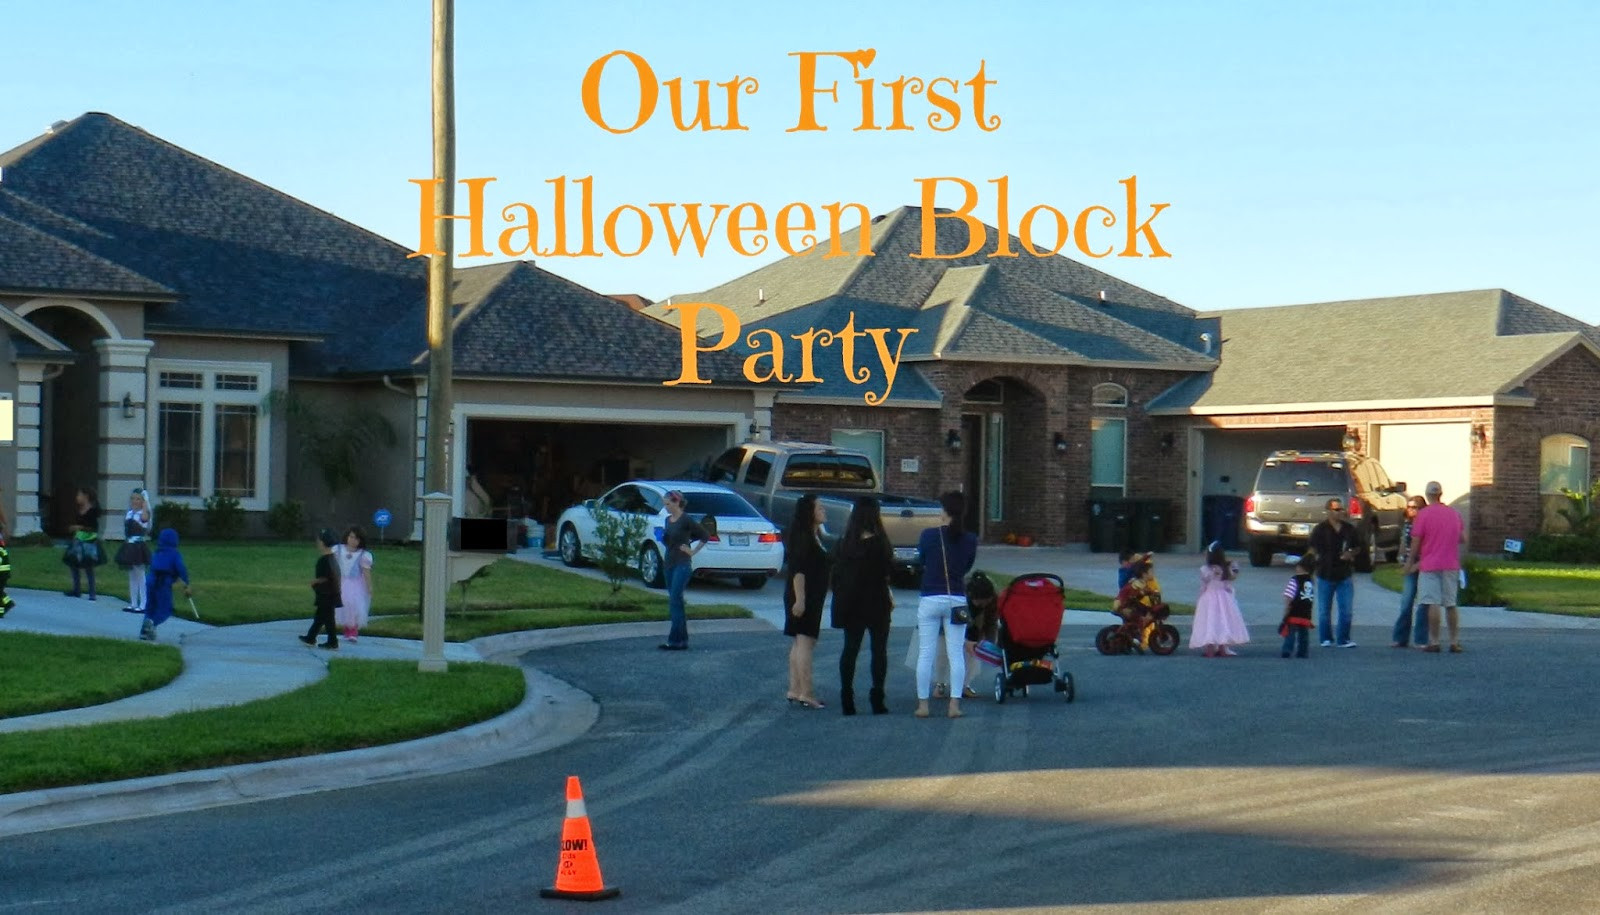 Halloween Block Party Ideas
 Mama Gets It Done Halloween Block Party